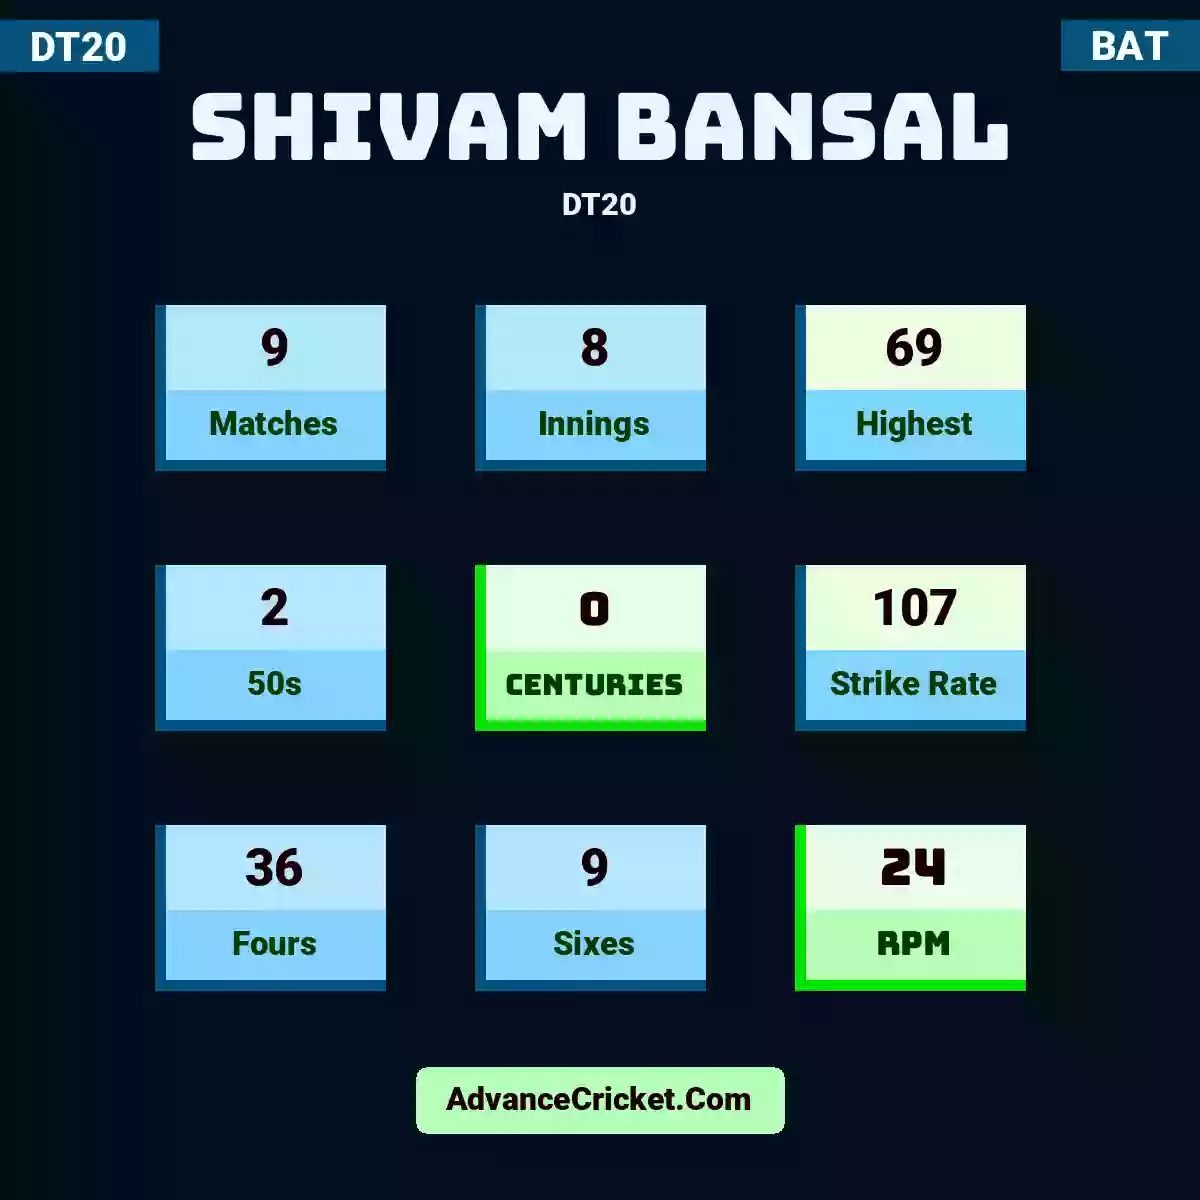 Shivam Bansal DT20 , Shivam Bansal played 9 matches, scored 69 runs as highest, 2 half-centuries, and 0 centuries, with a strike rate of 107. S.Bansal hit 36 fours and 9 sixes, with an RPM of 24.